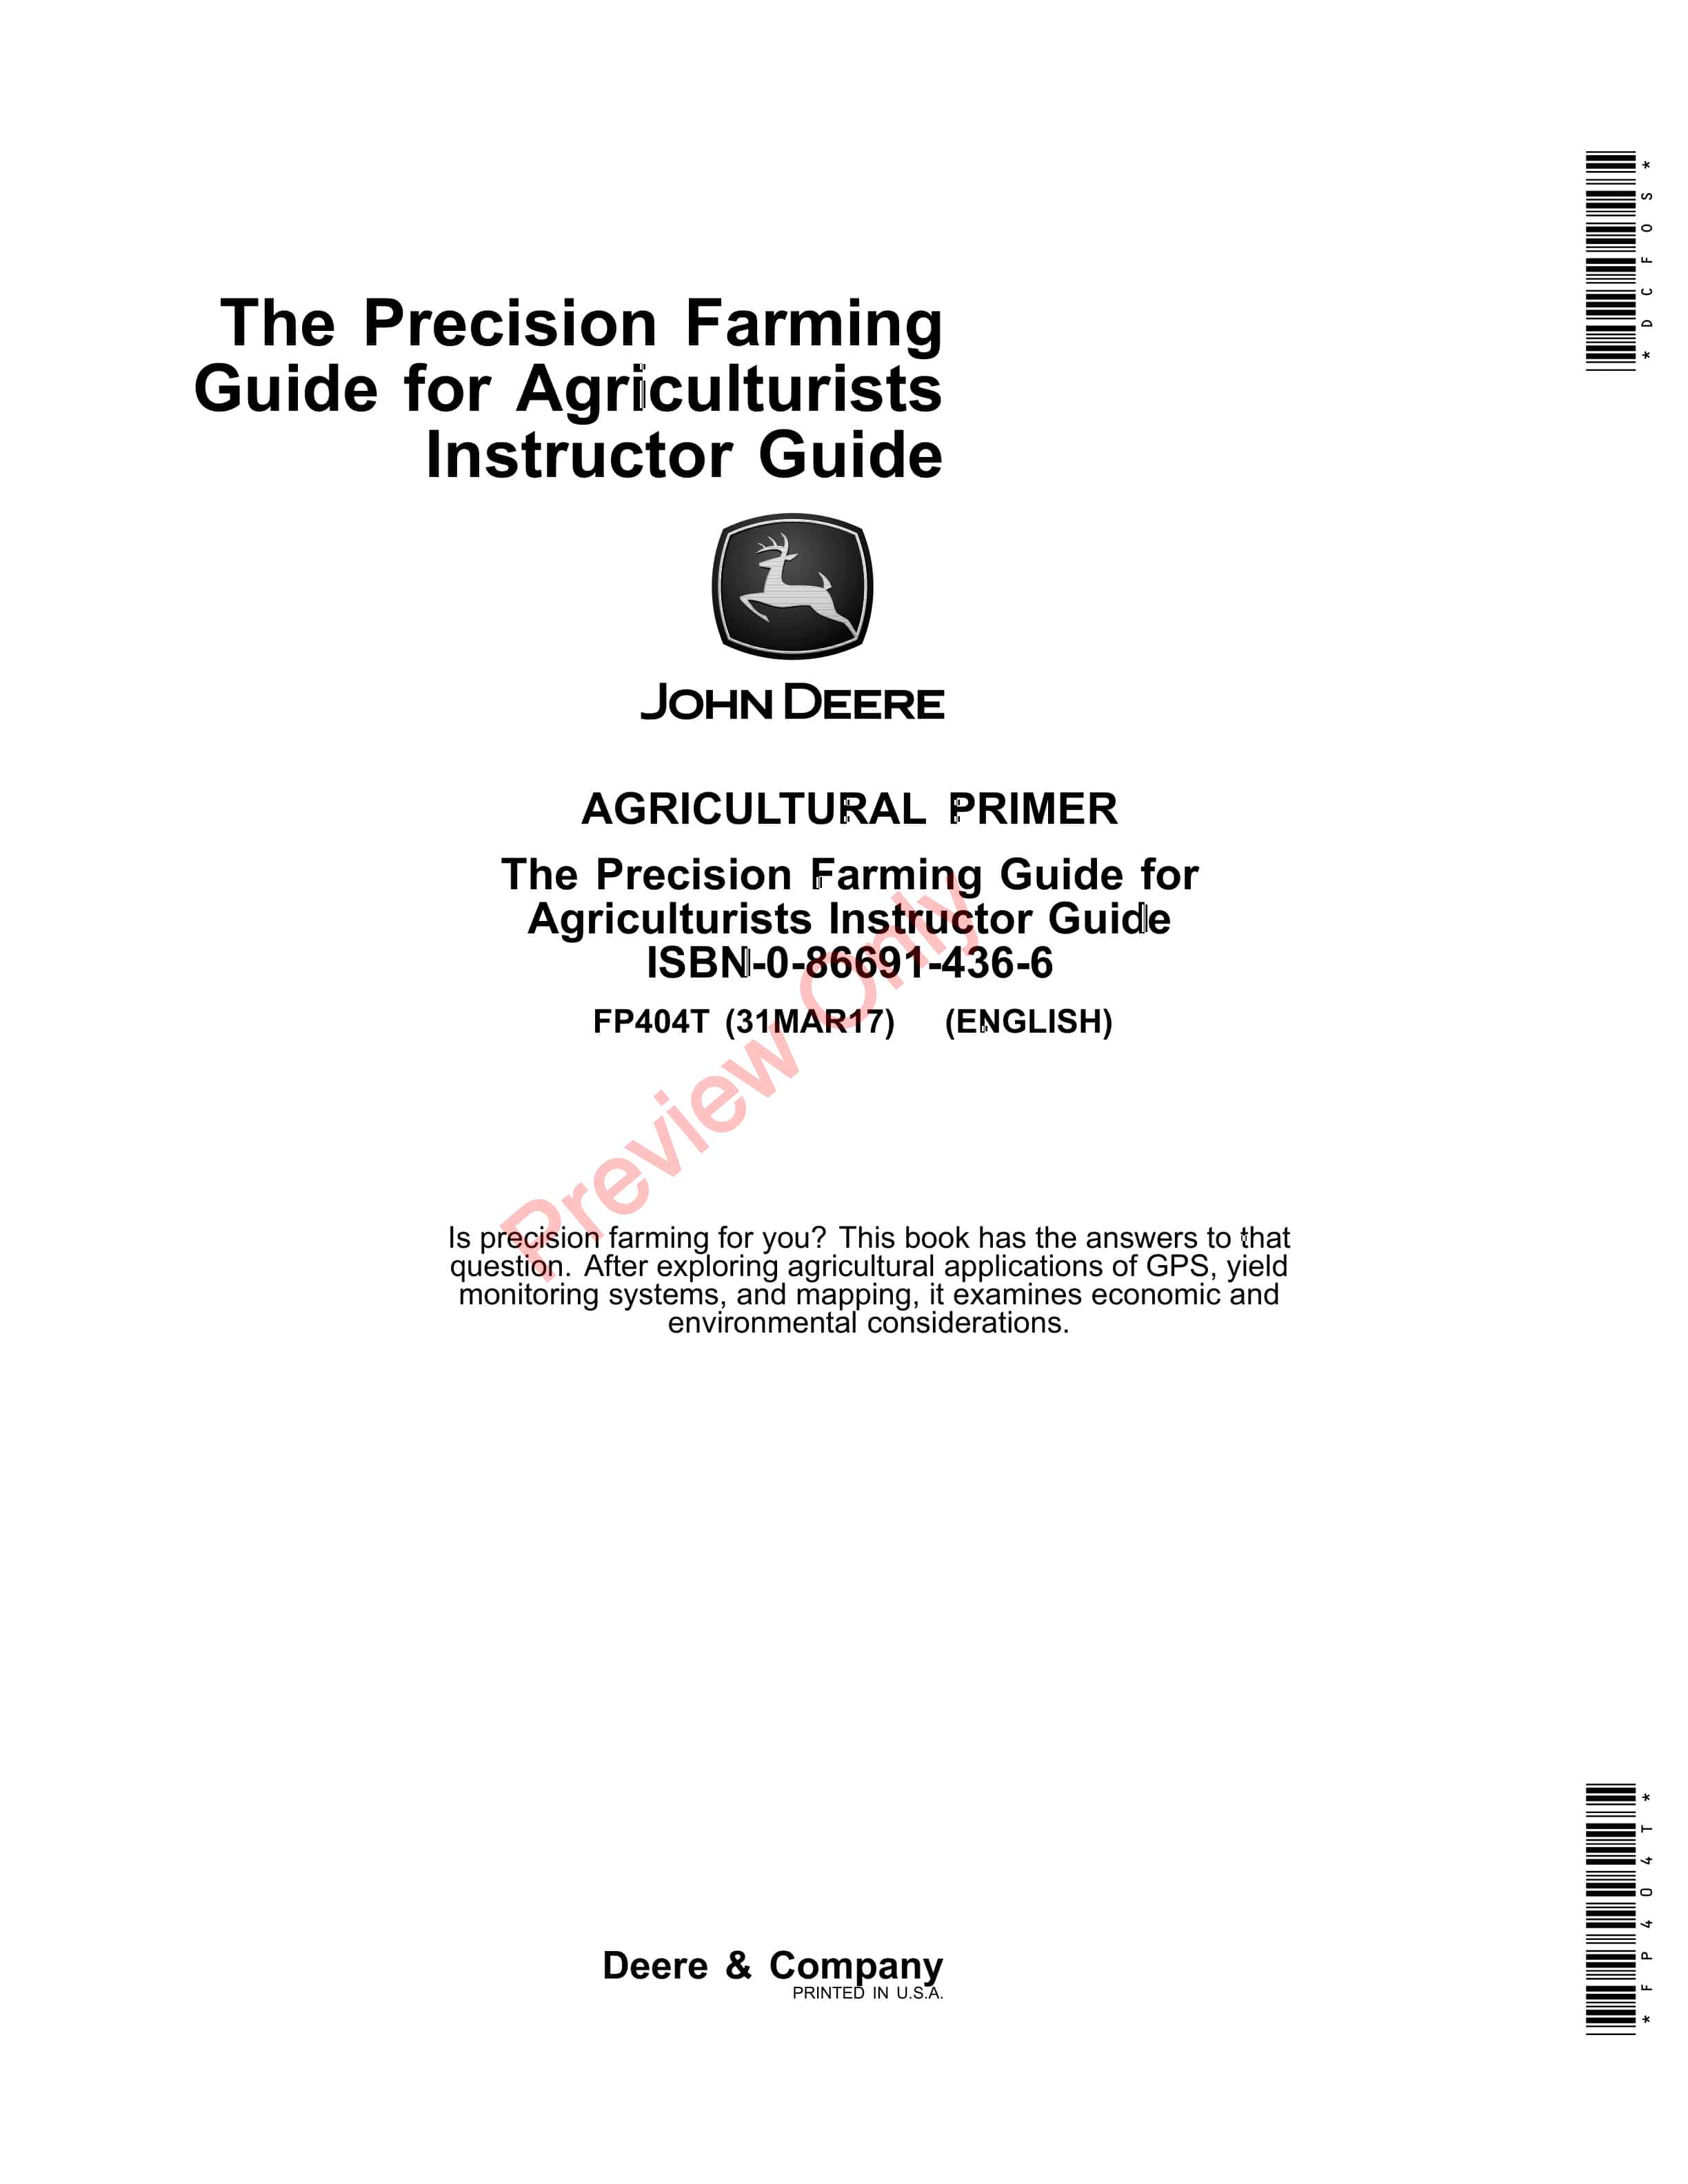 John Deere FOSFMO The Precision Farming Guide for Agriculturists Agricultural Primer FP404T 31MAR17 1